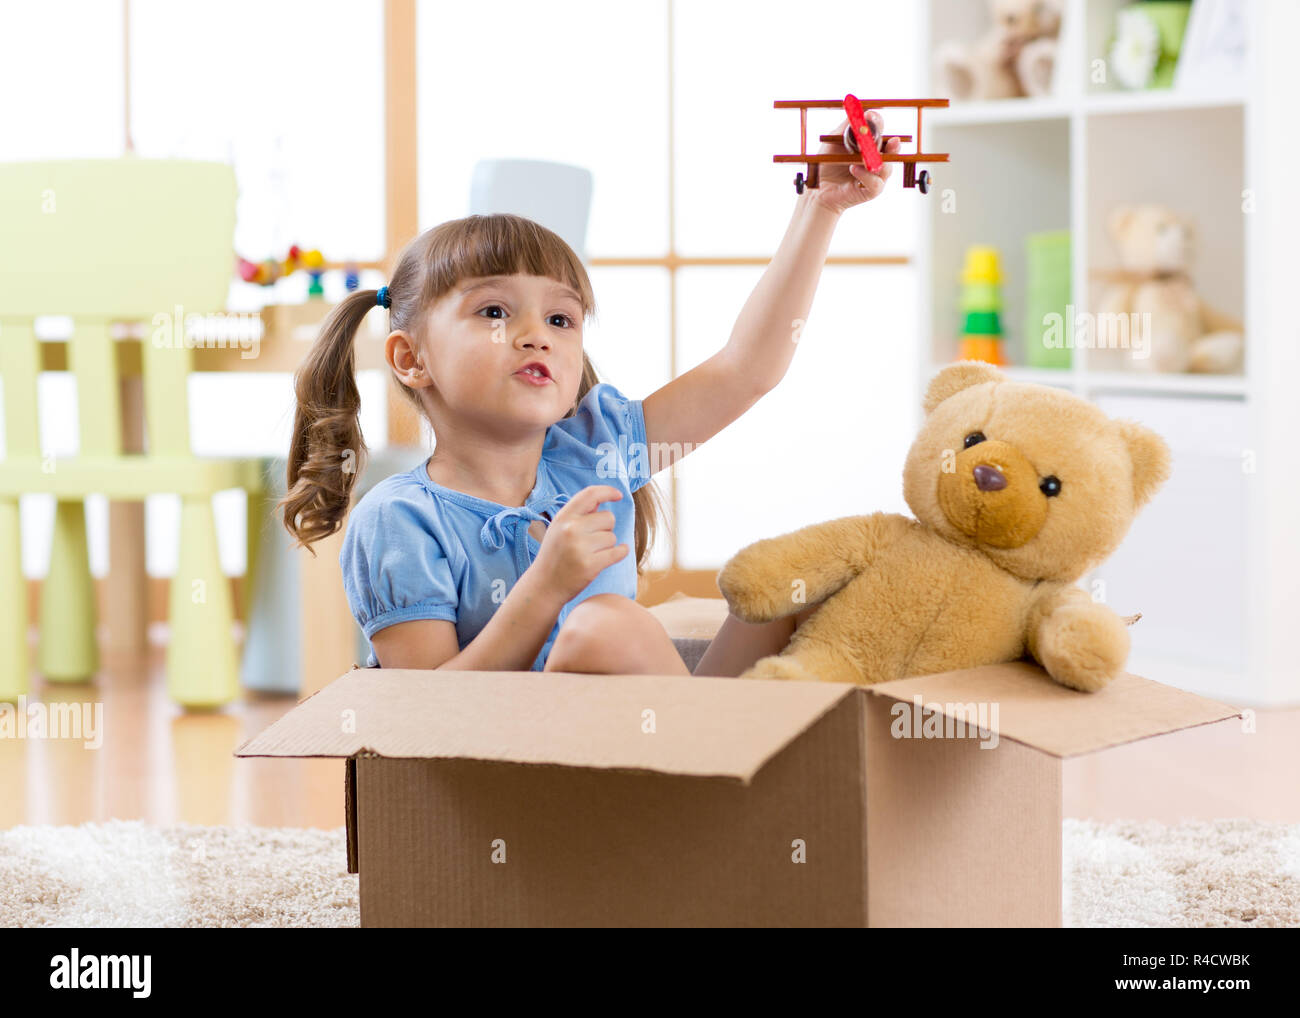 Child girl playing pilot flying a cardboard box in nursery room Stock Photo